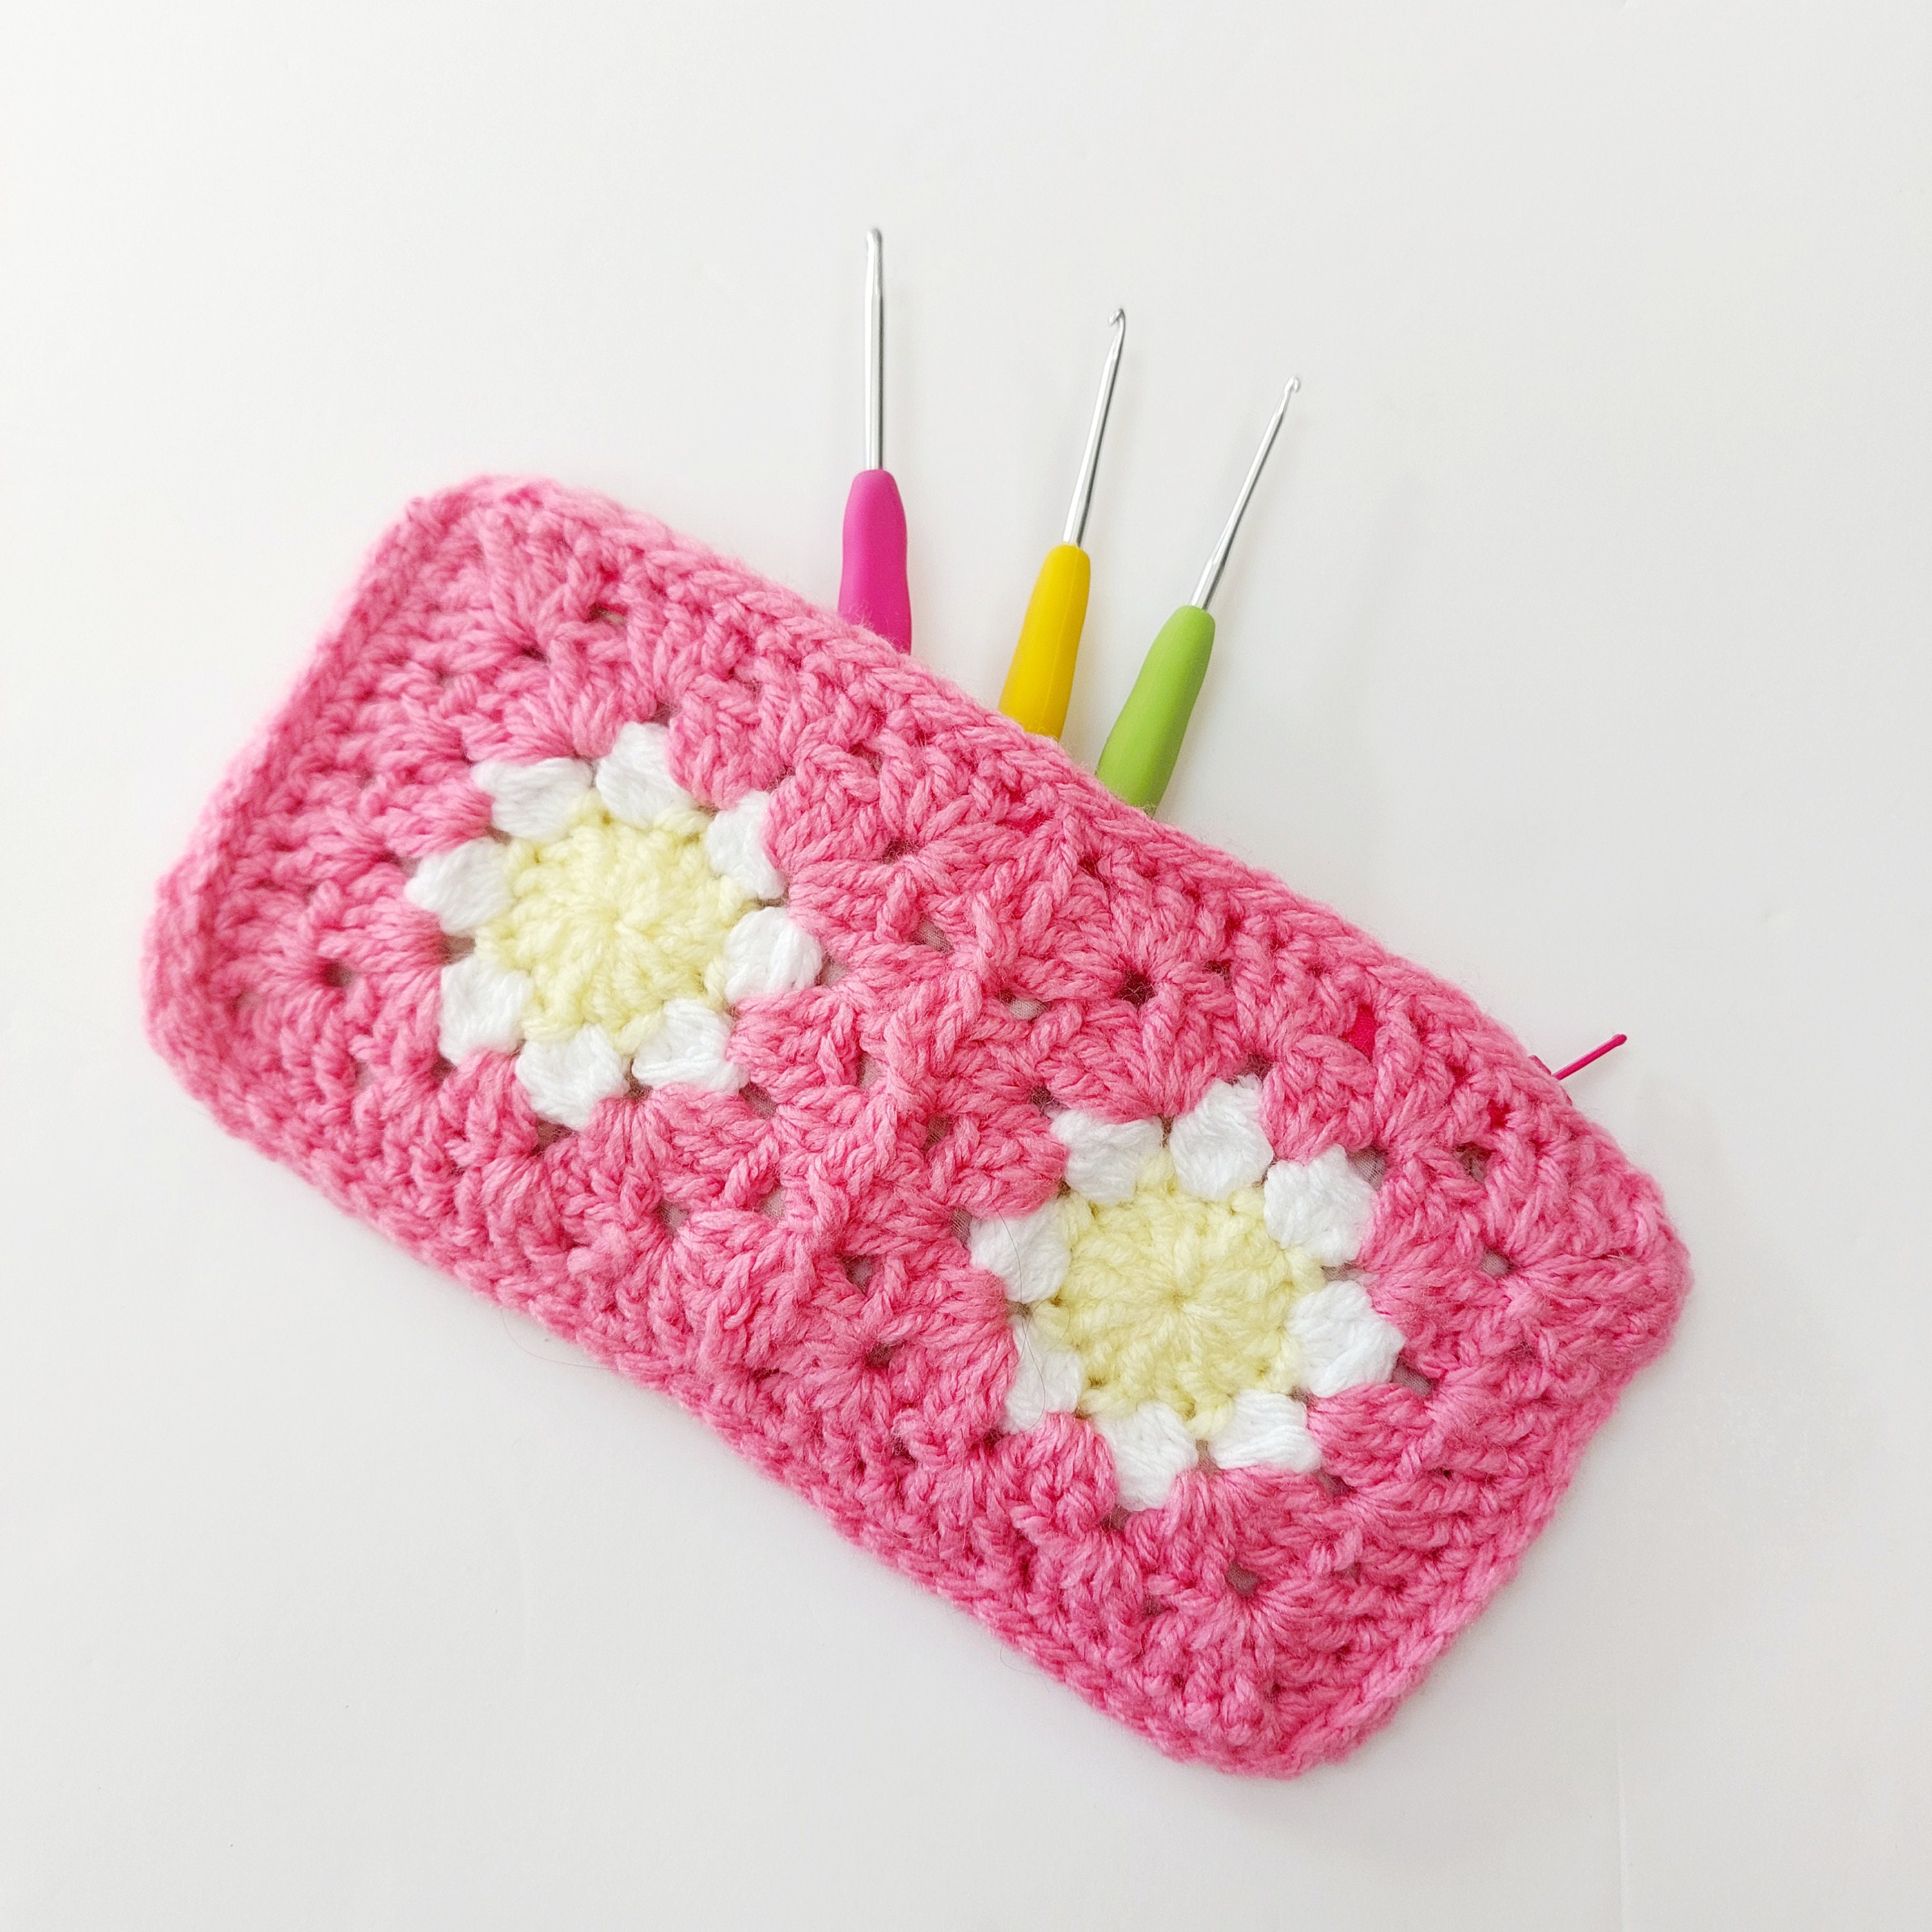 Spiced Tea quilted cotton fabric crochet hook case / holder